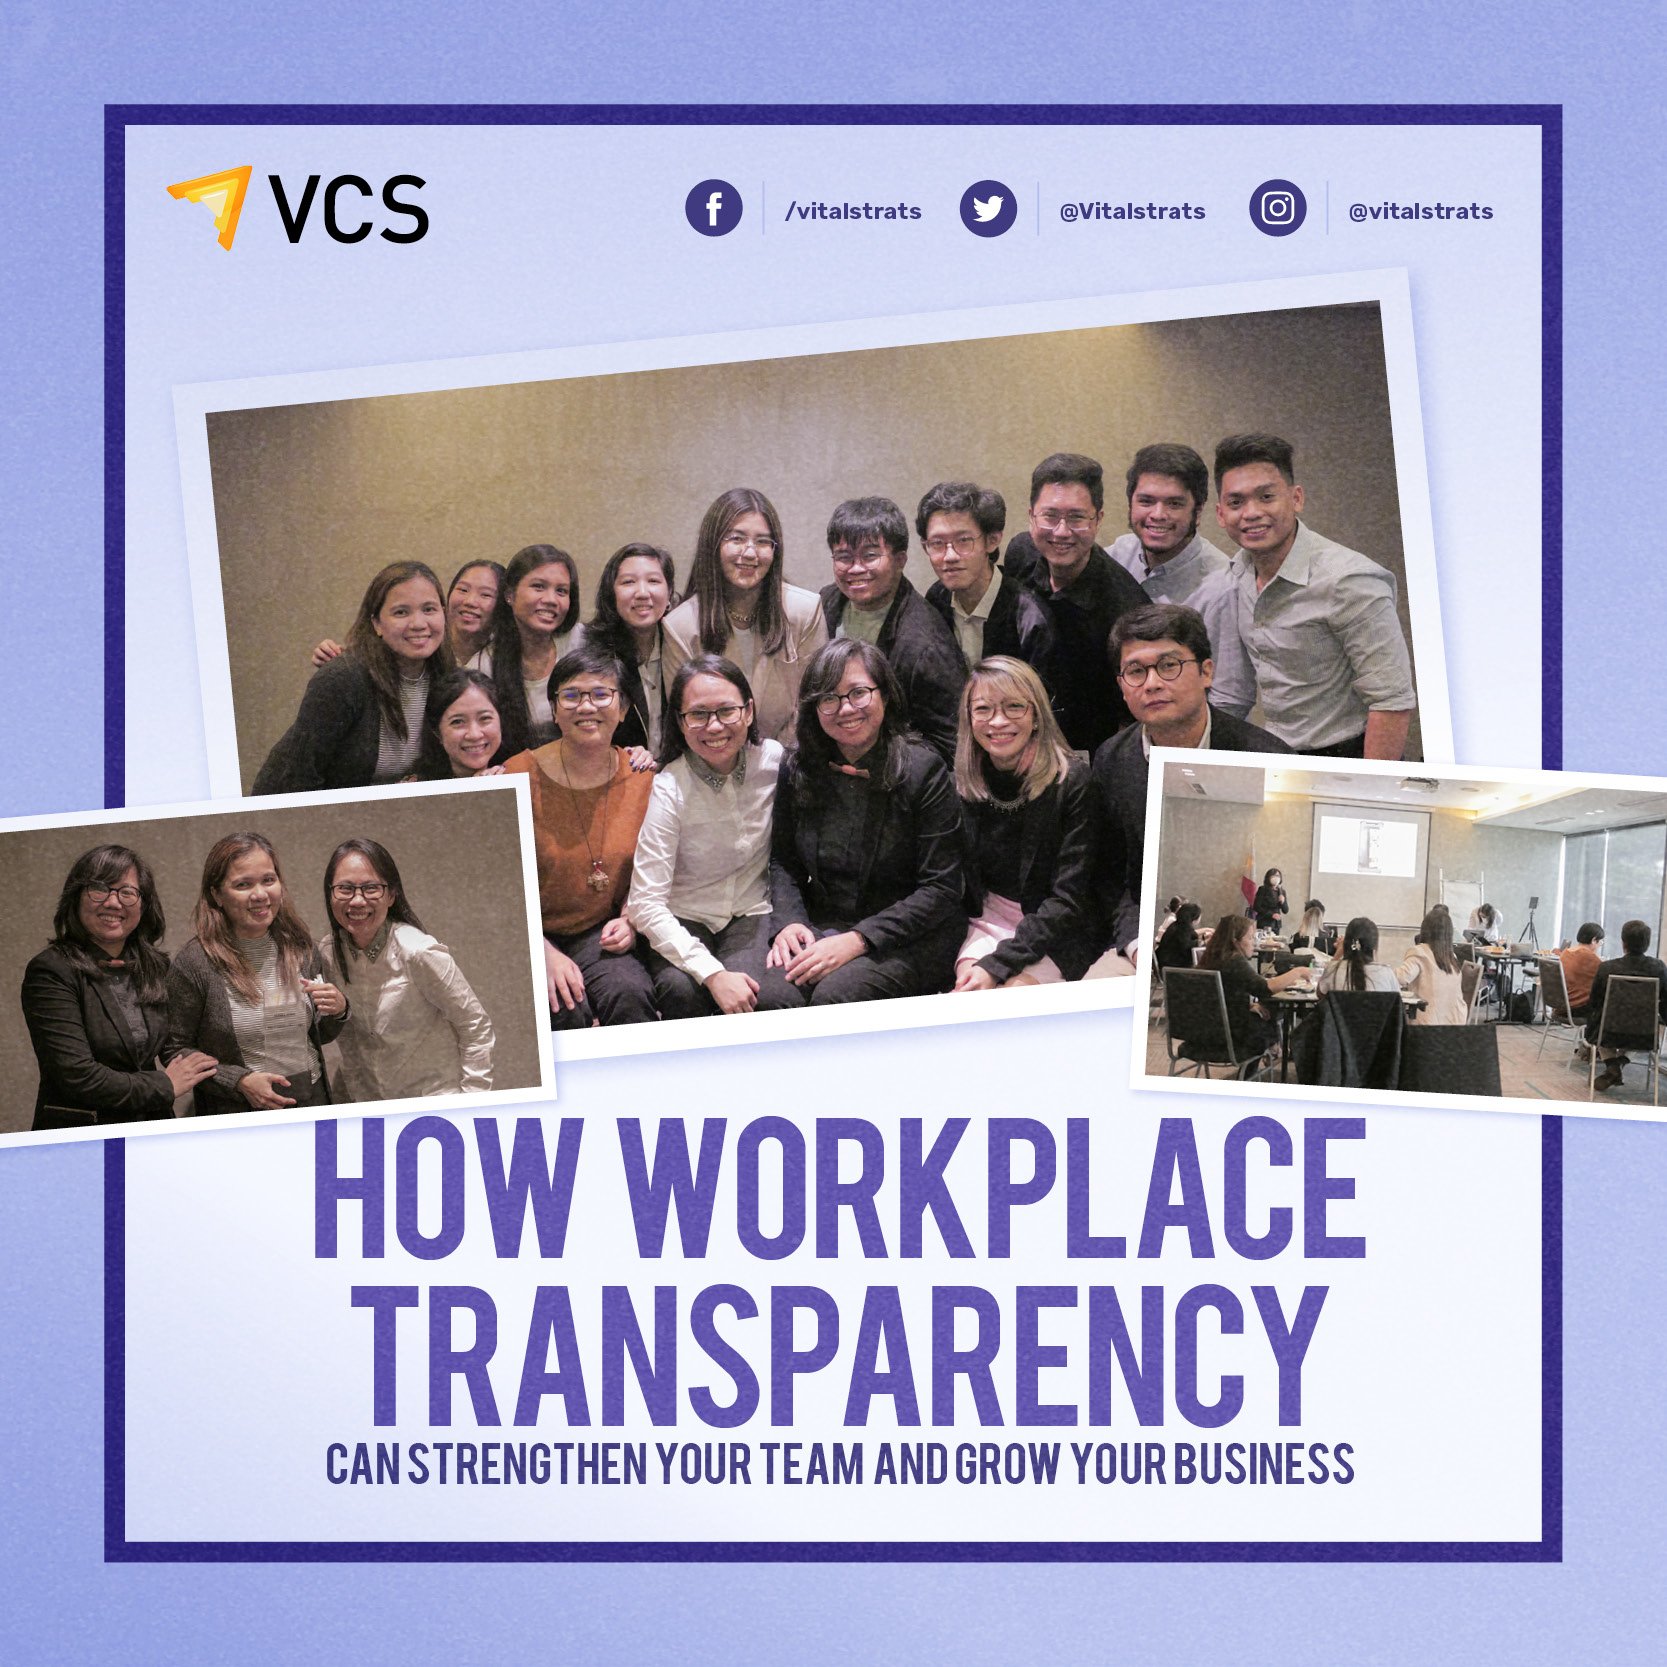 4 REASONS WHY WORKSPACE TRANSPARENCY BENEFITS YOUR EMPLOYEES AND HELPS GROW YOUR BUSINESS